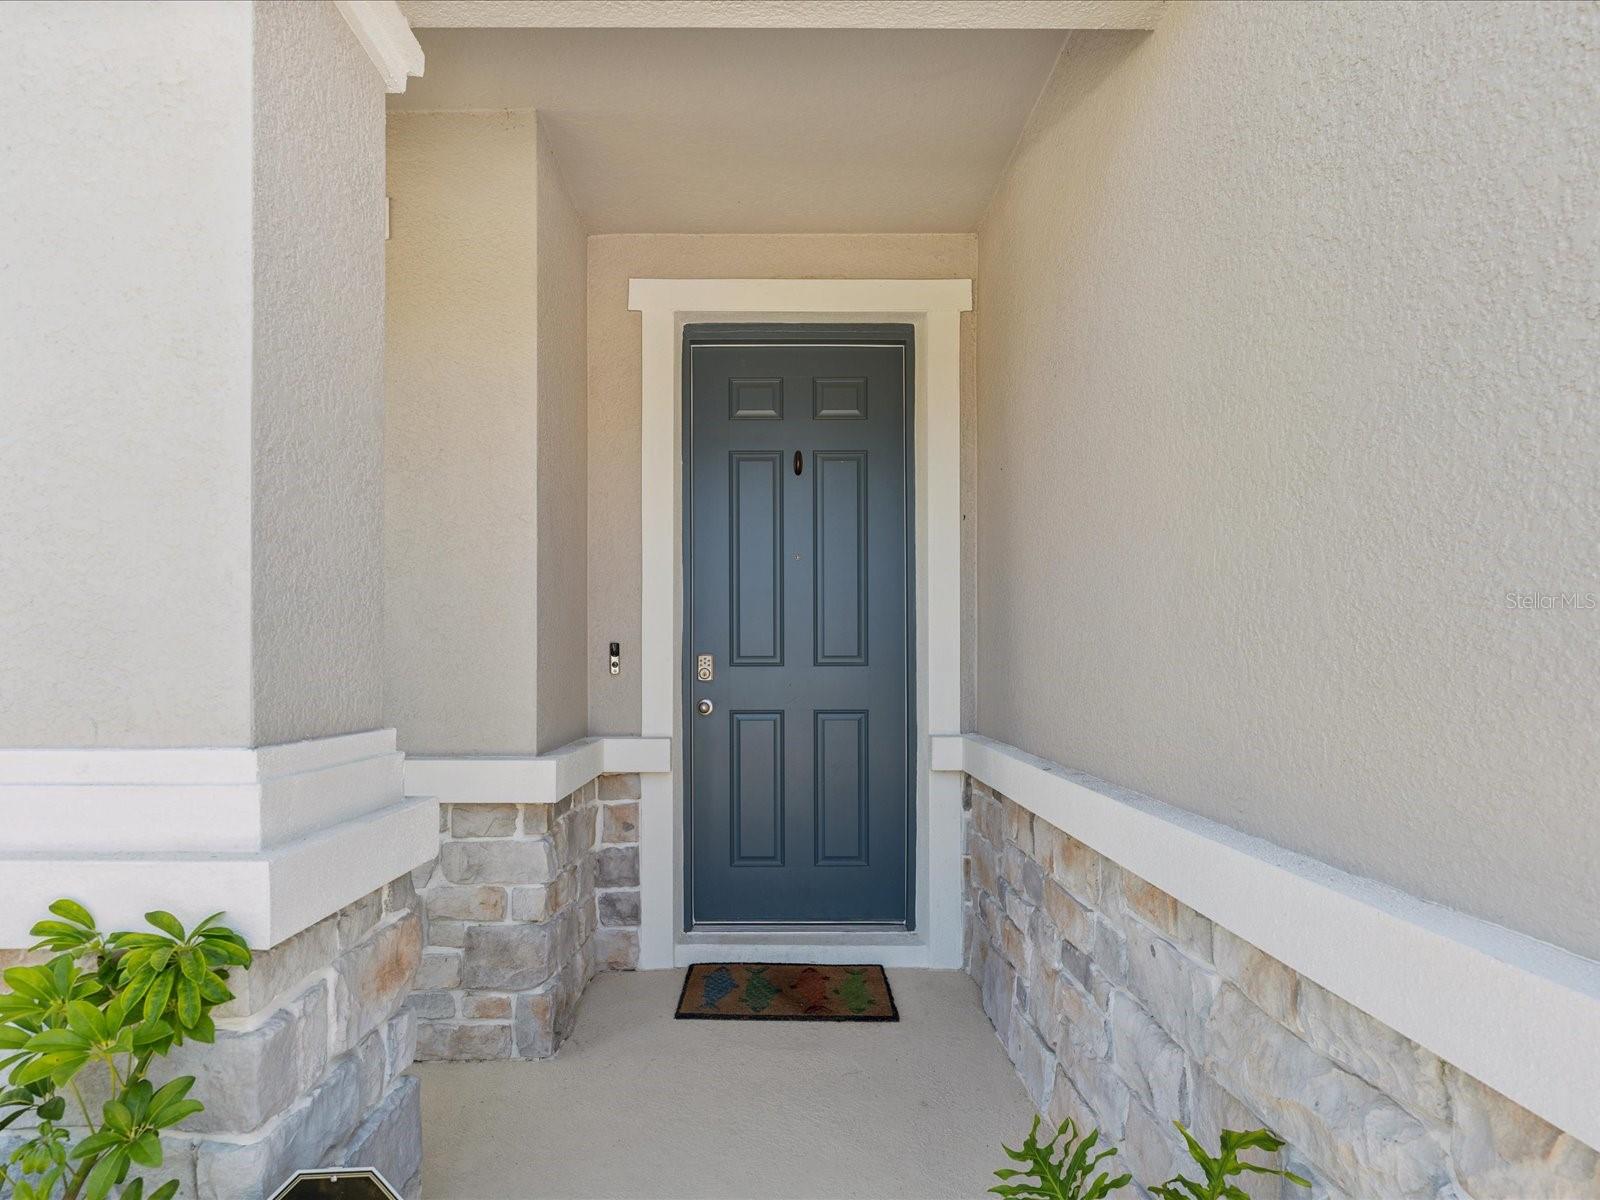 The front door has a covered entryway to protect anyone from the elements.